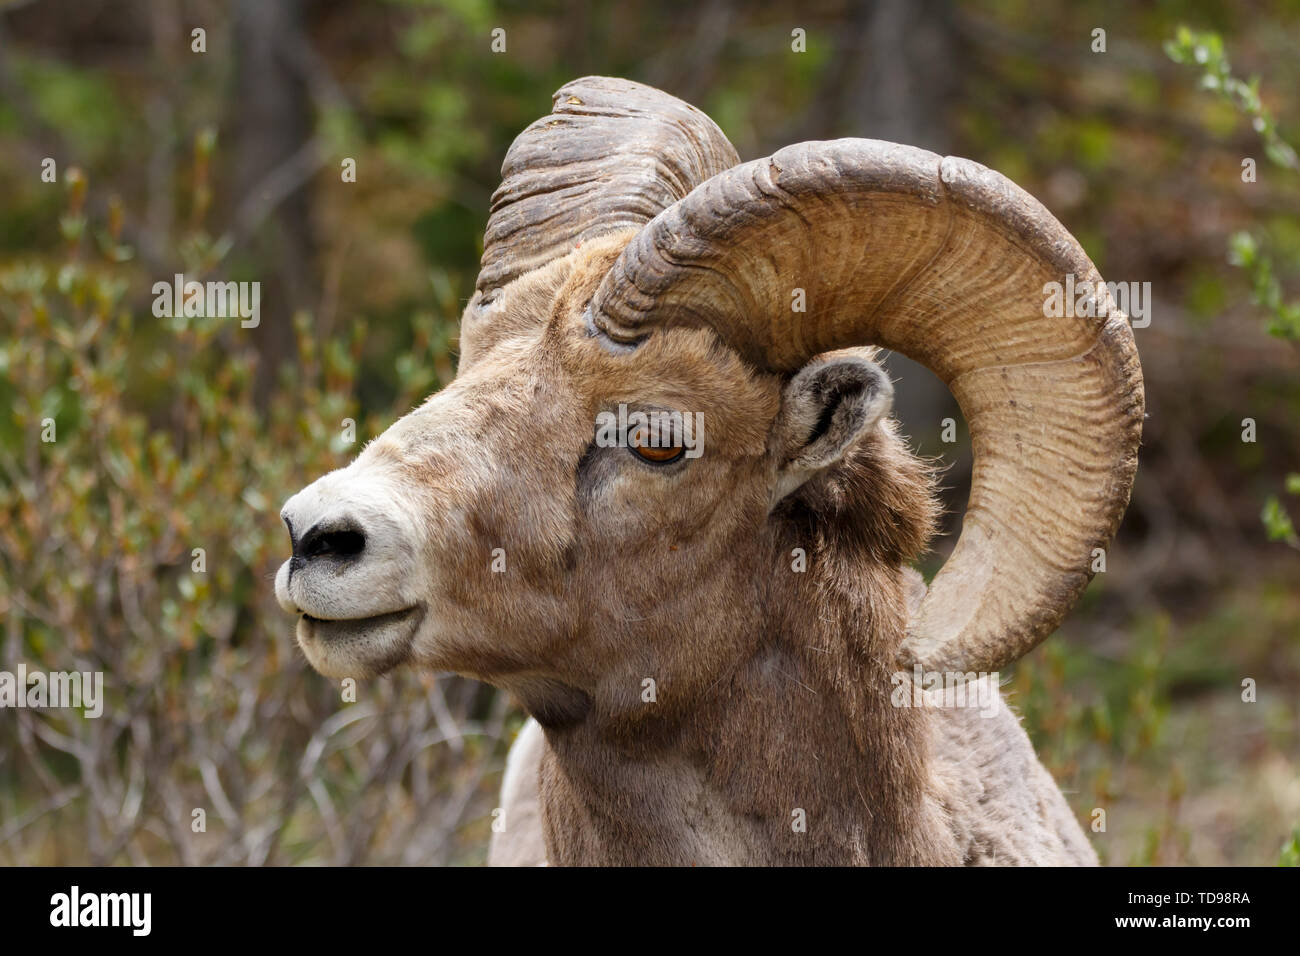 Male Big Horned Sheep Close Up Head Image Stock Photo